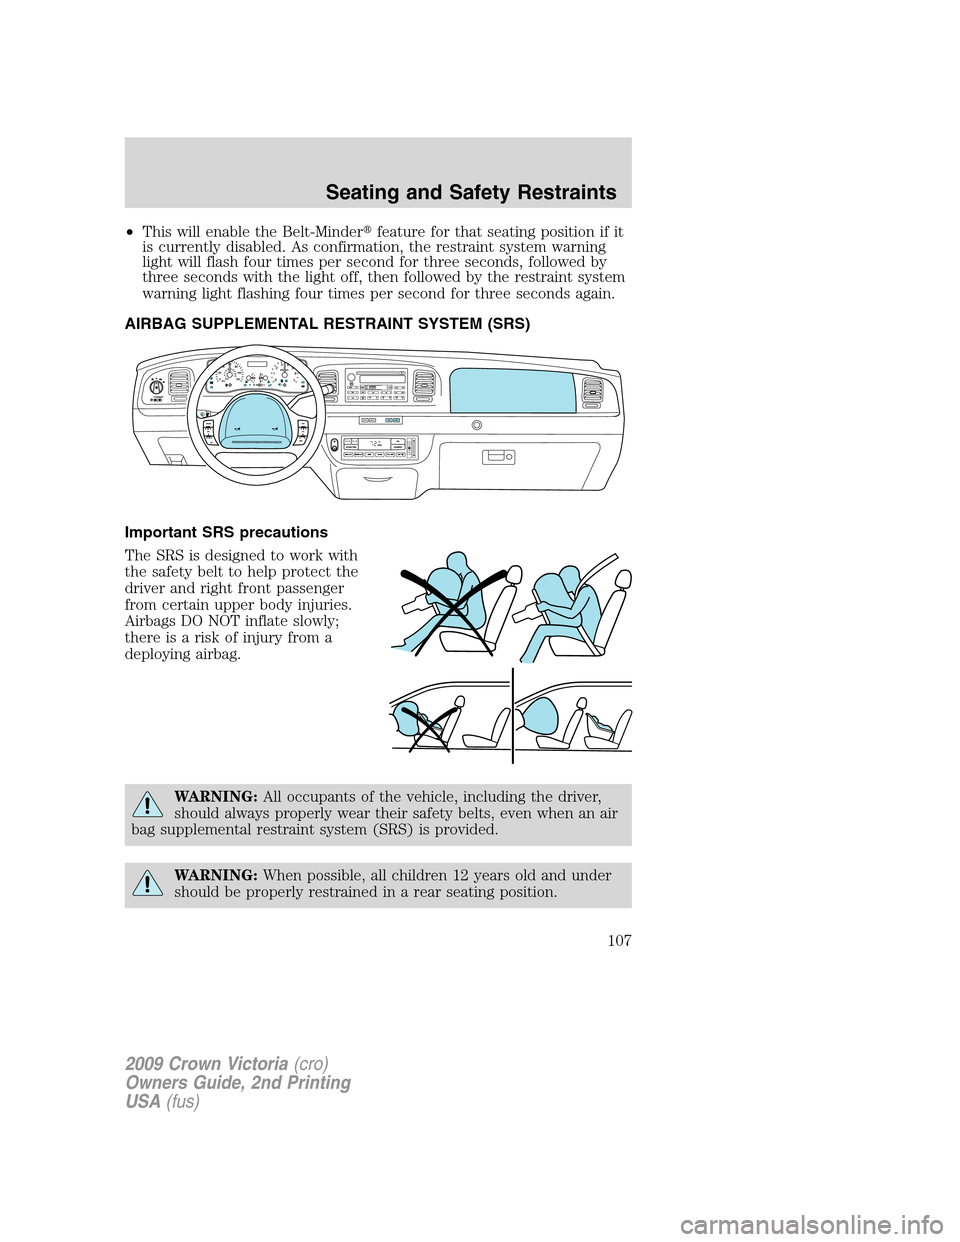 FORD CROWN VICTORIA 2009 2.G User Guide •This will enable the Belt-Minderfeature for that seating position if it
is currently disabled. As confirmation, the restraint system warning
light will flash four times per second for three second